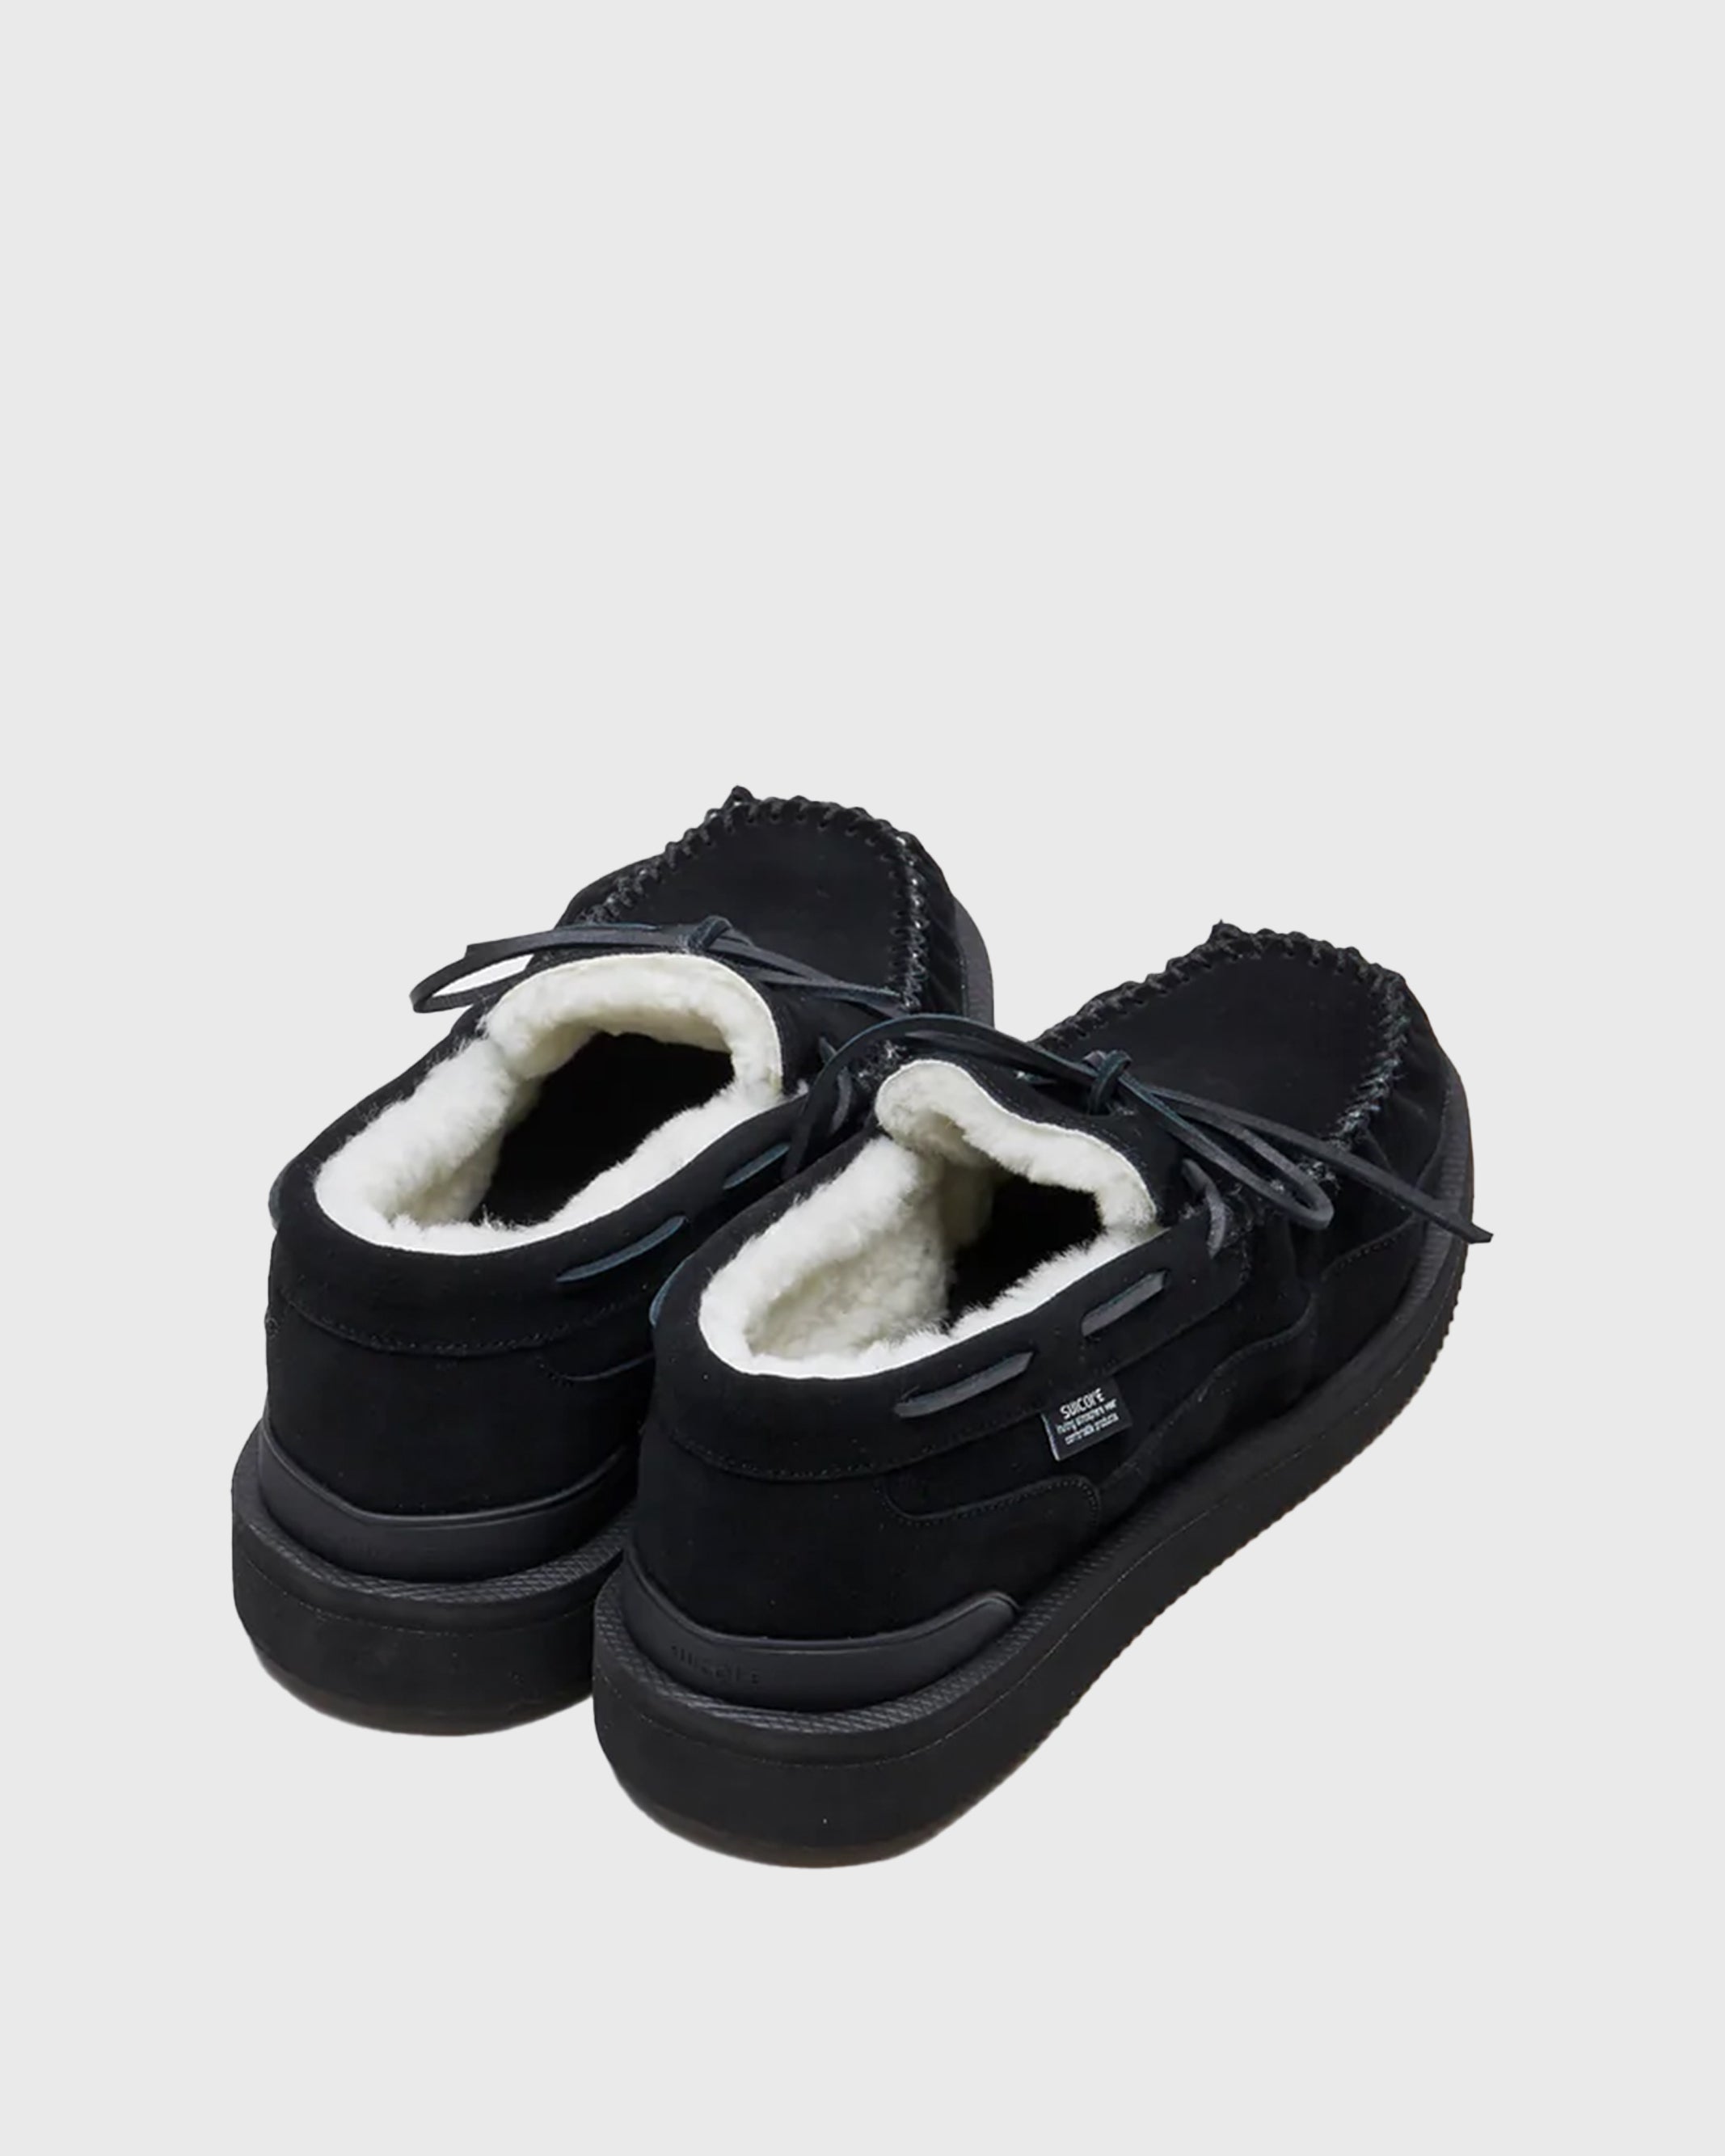 SUICOKE OWM-Mab in Black OG-199MAB | Shop from eightywingold an official brand partner for SUICOKE Canada and US.